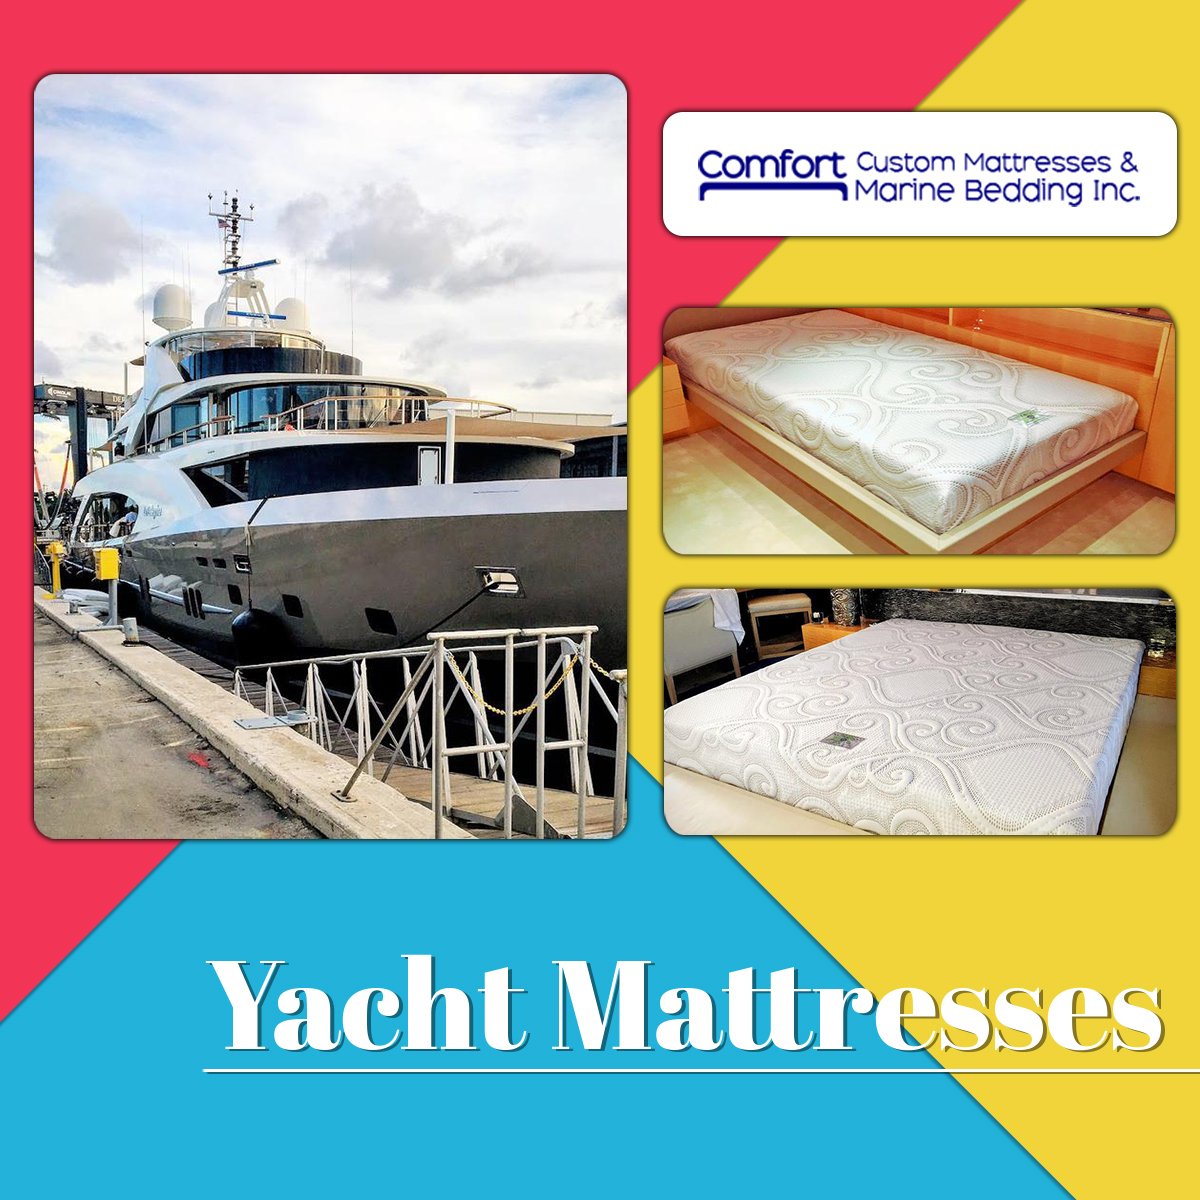 Each of our #Yacht #mattresses is custom-made by our experienced #mattress makers and backed by our Perfect Fit Guarantee. 

comfortcustombedding.com/yachtmattresse…

#YachtMattress #CustomBedding #Boat #ComfortCustomBedding #BeddingIdeas #Luxuriousmattress #Sleep #Customsize #Custommade